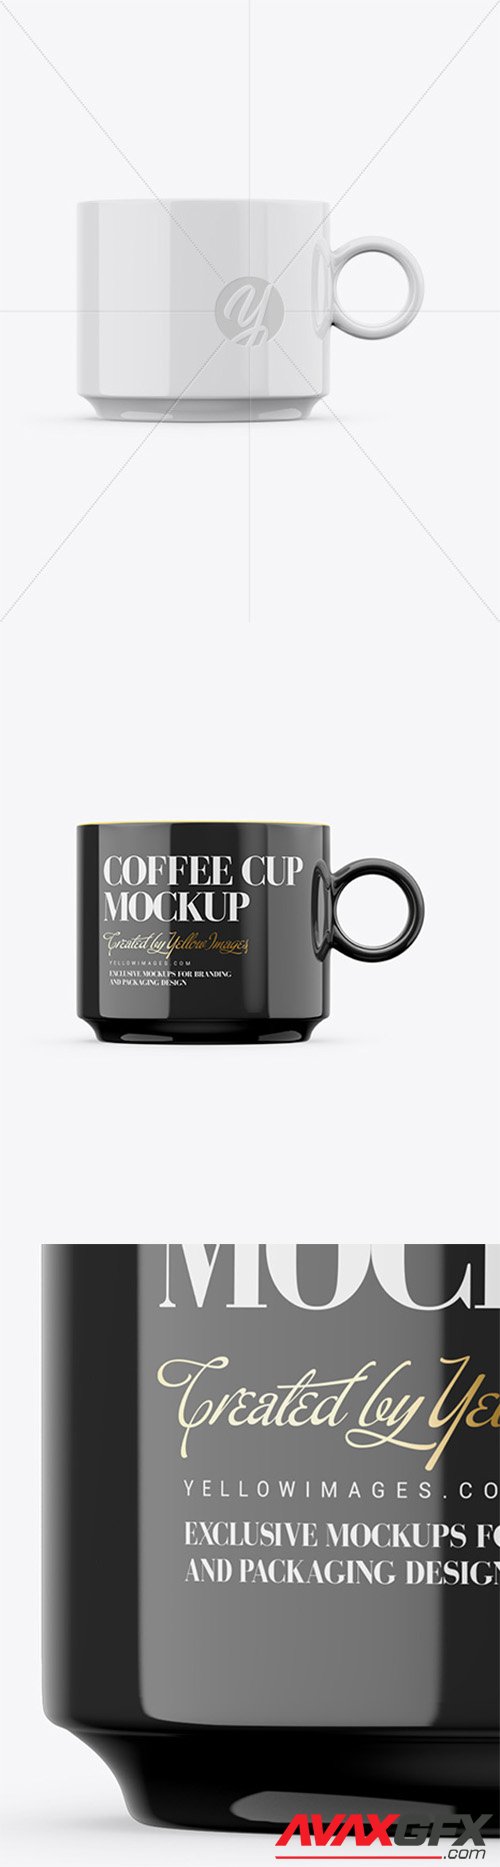 Glossy Coffee Cup Mockup - Front View 26660